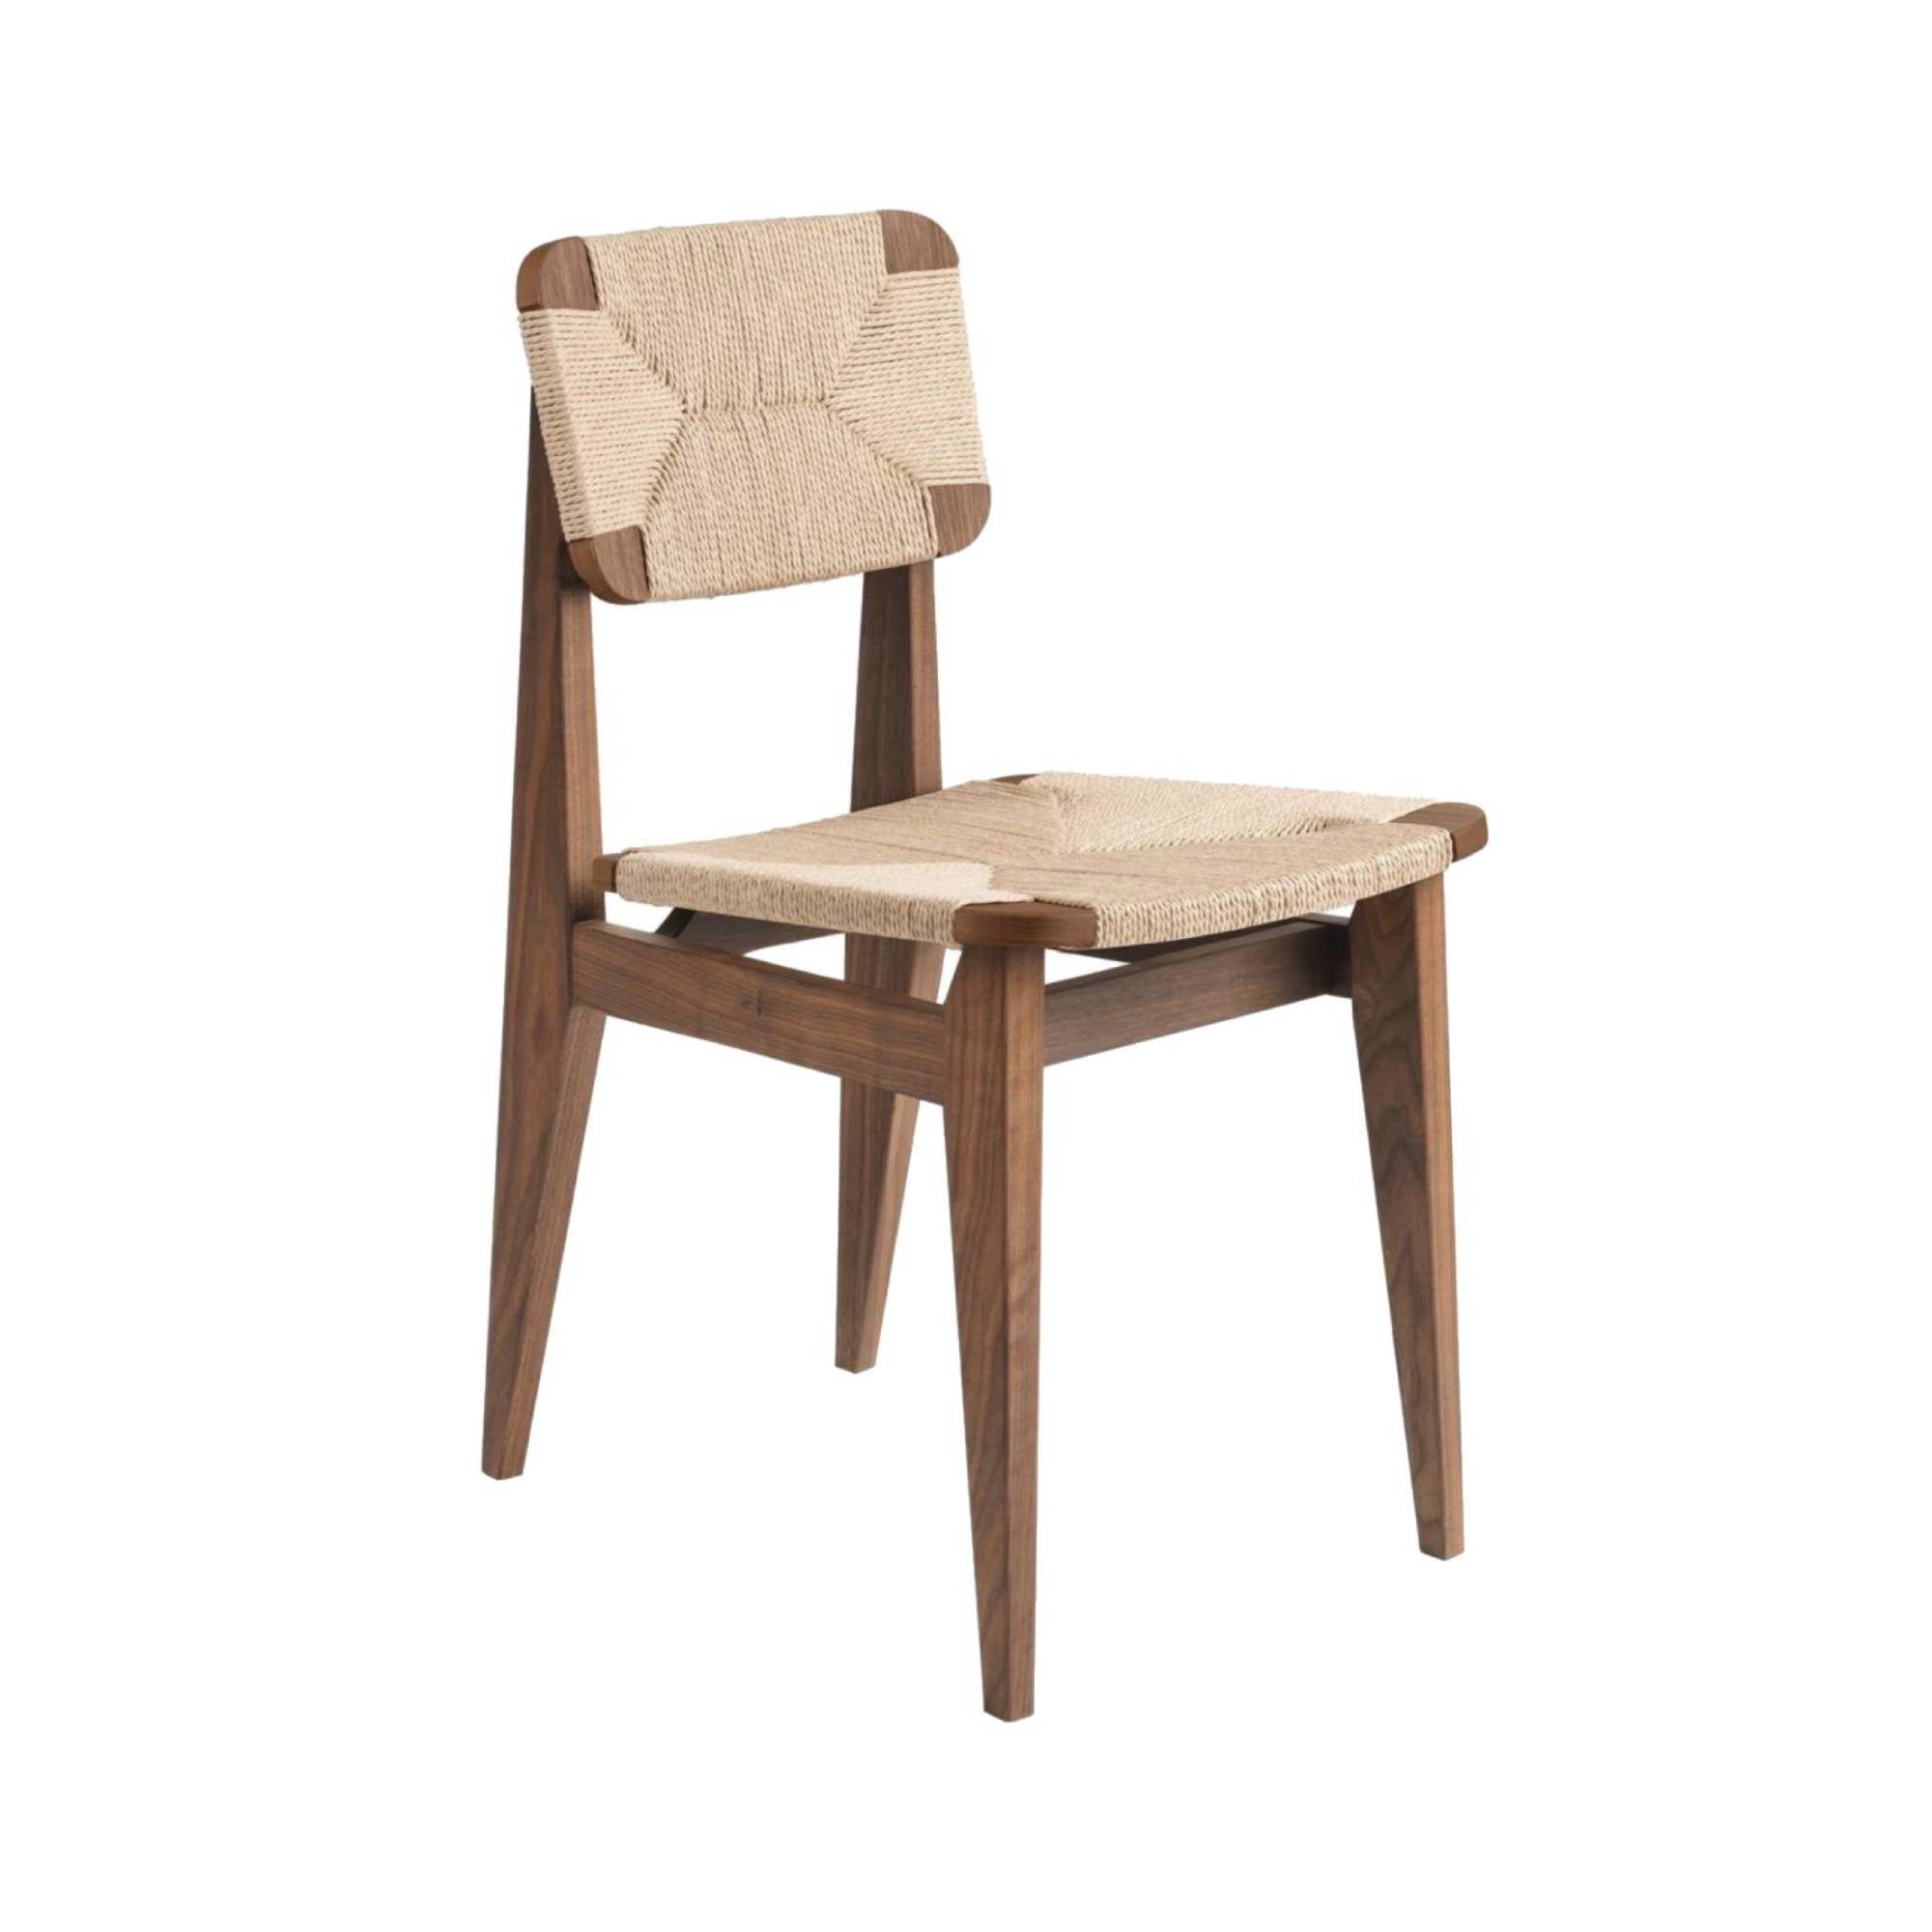 C-Chair Dining Chair: Paper Cord + American Walnut